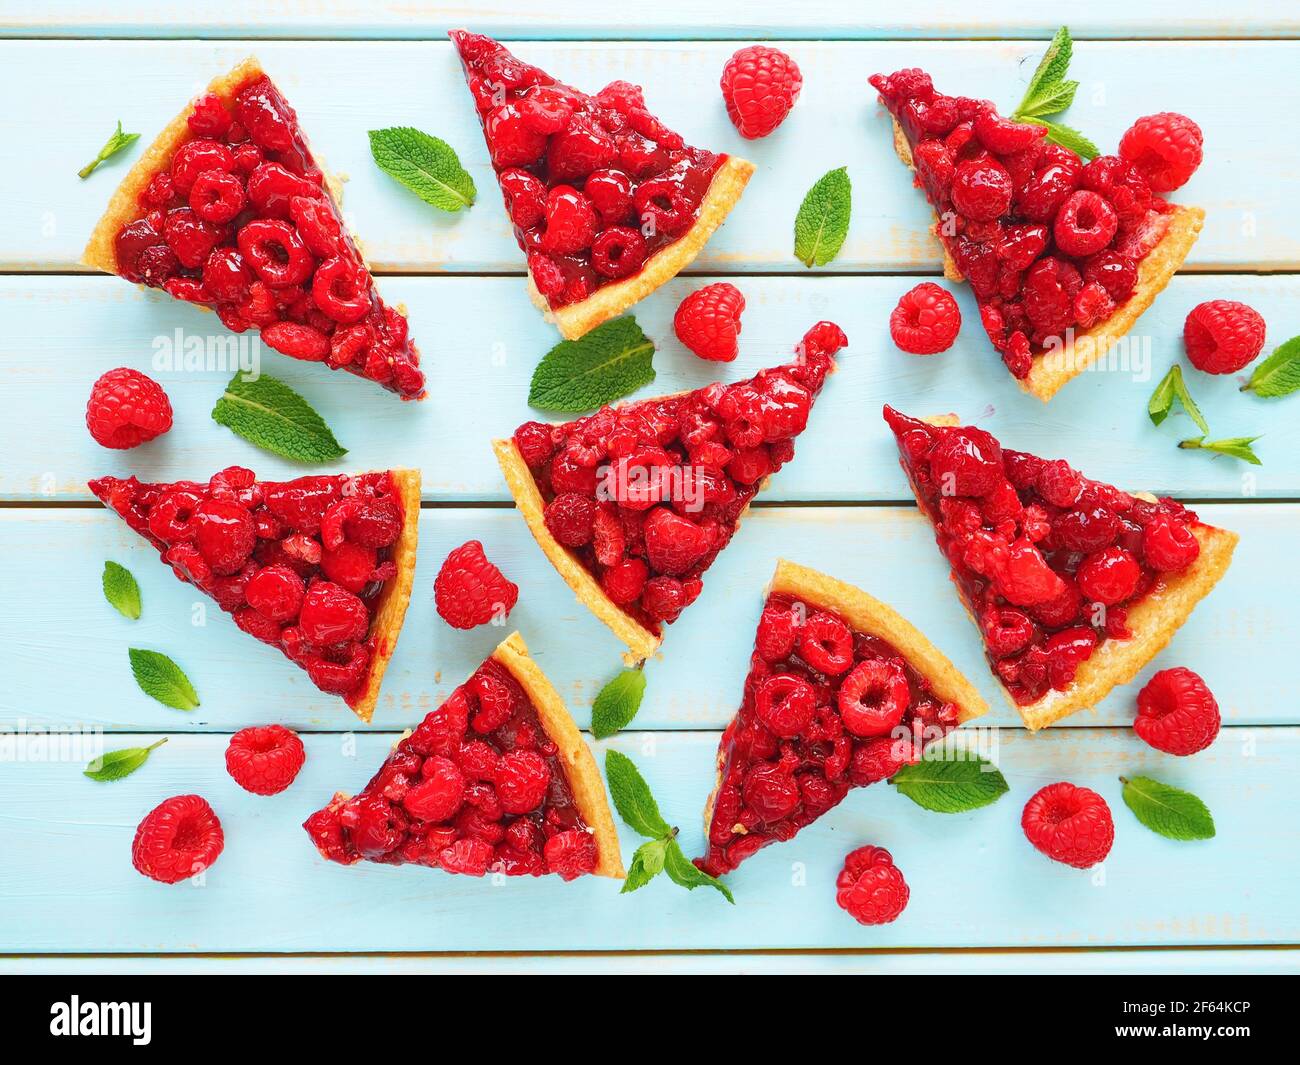 Slices of homemade traditional sweet tart with raspberry and mint leaves on wooden background Stock Photo